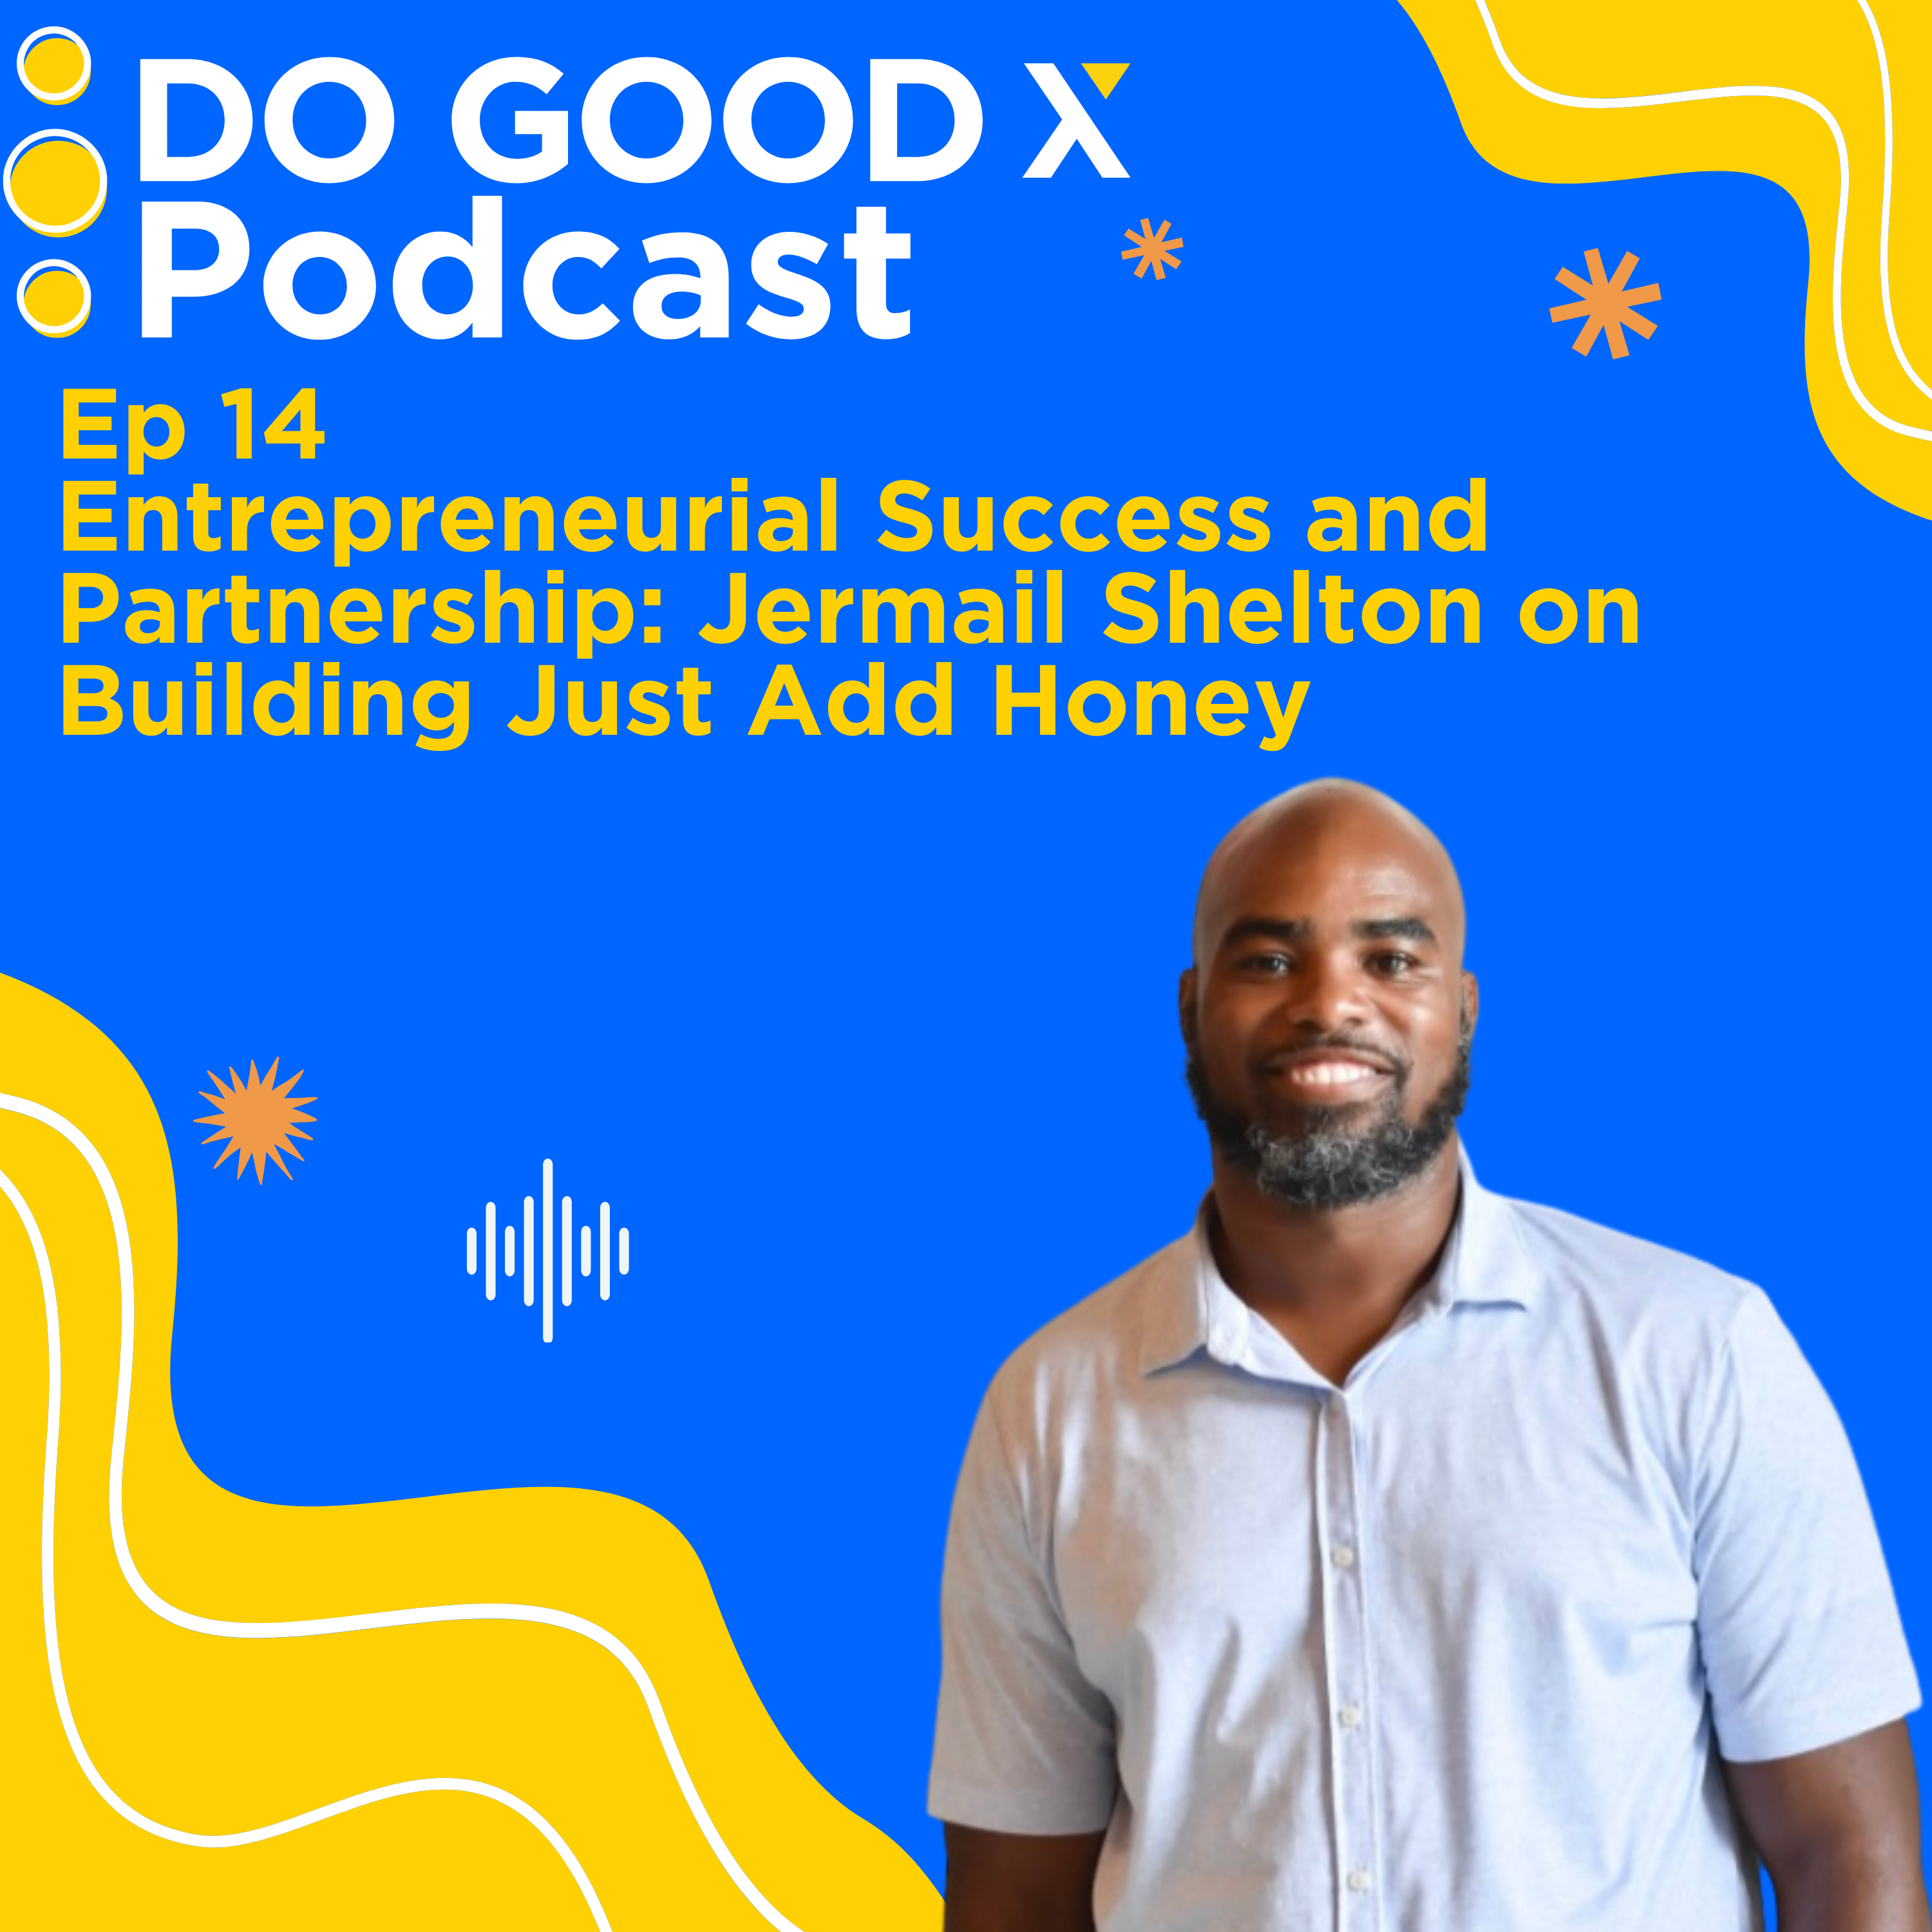 Ep. 14 Entrepreneurial Success and Partnership: Jermail Shelton on Building Just Add Honey